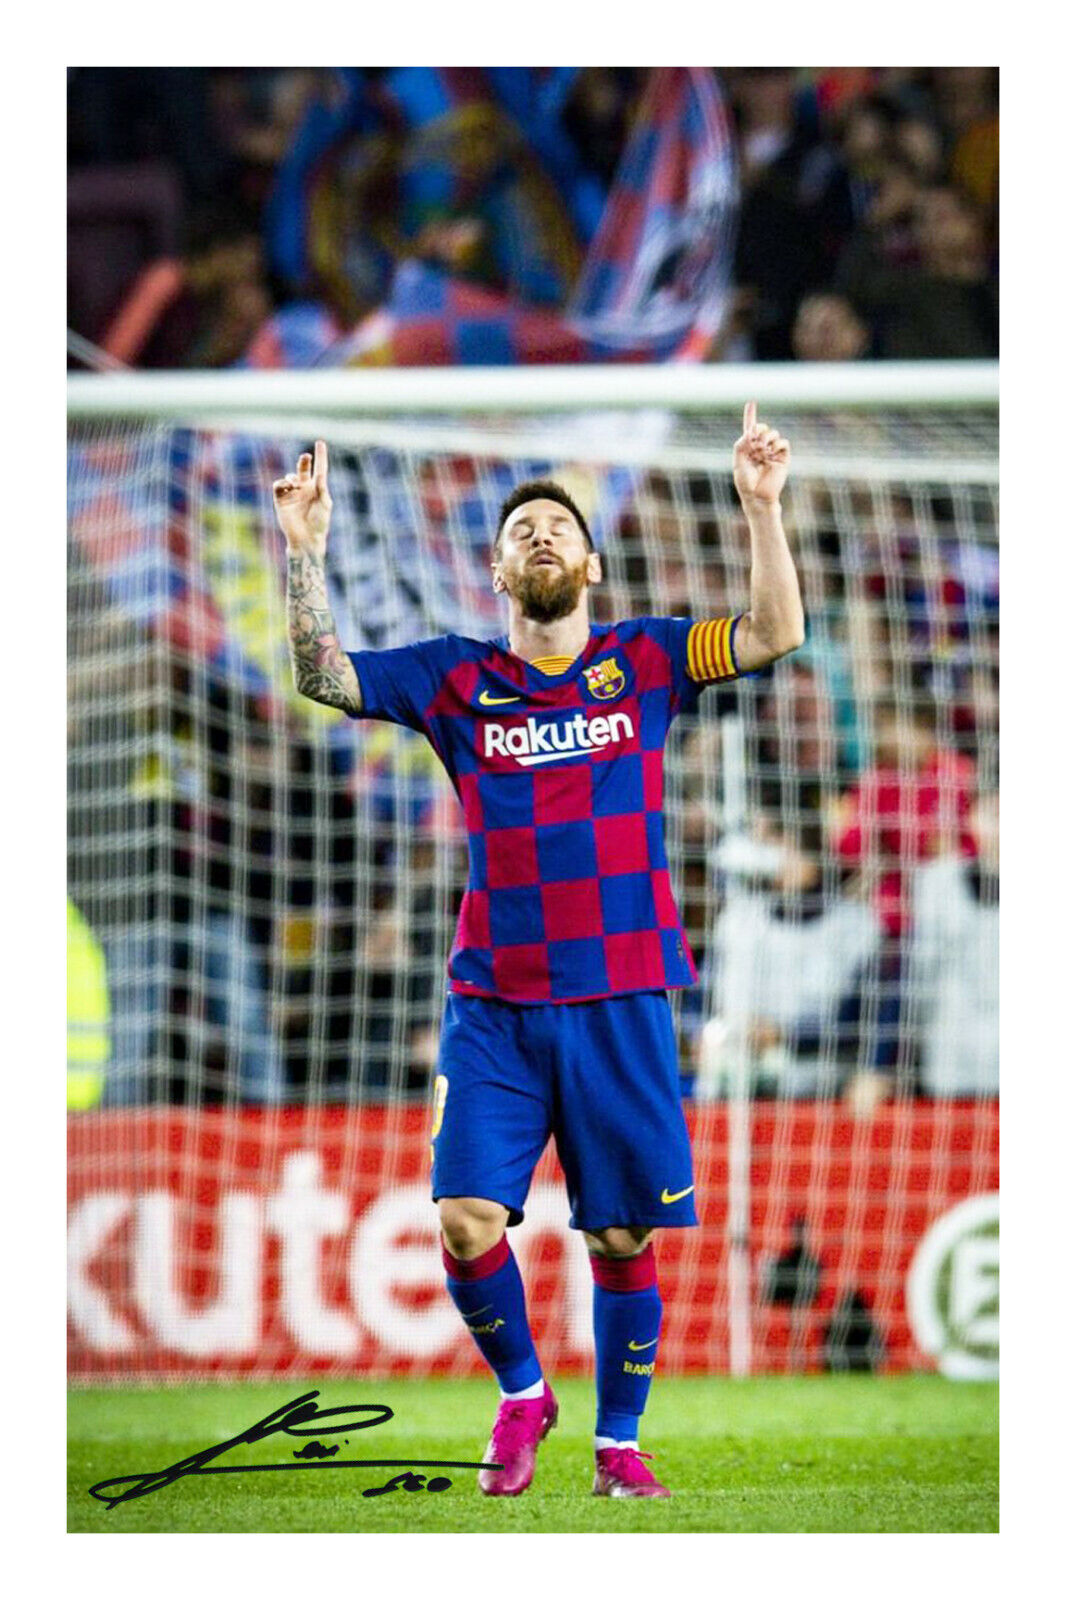 Lionel Messi Signed A4 Autograph Photo Poster painting Print Football Barcelona